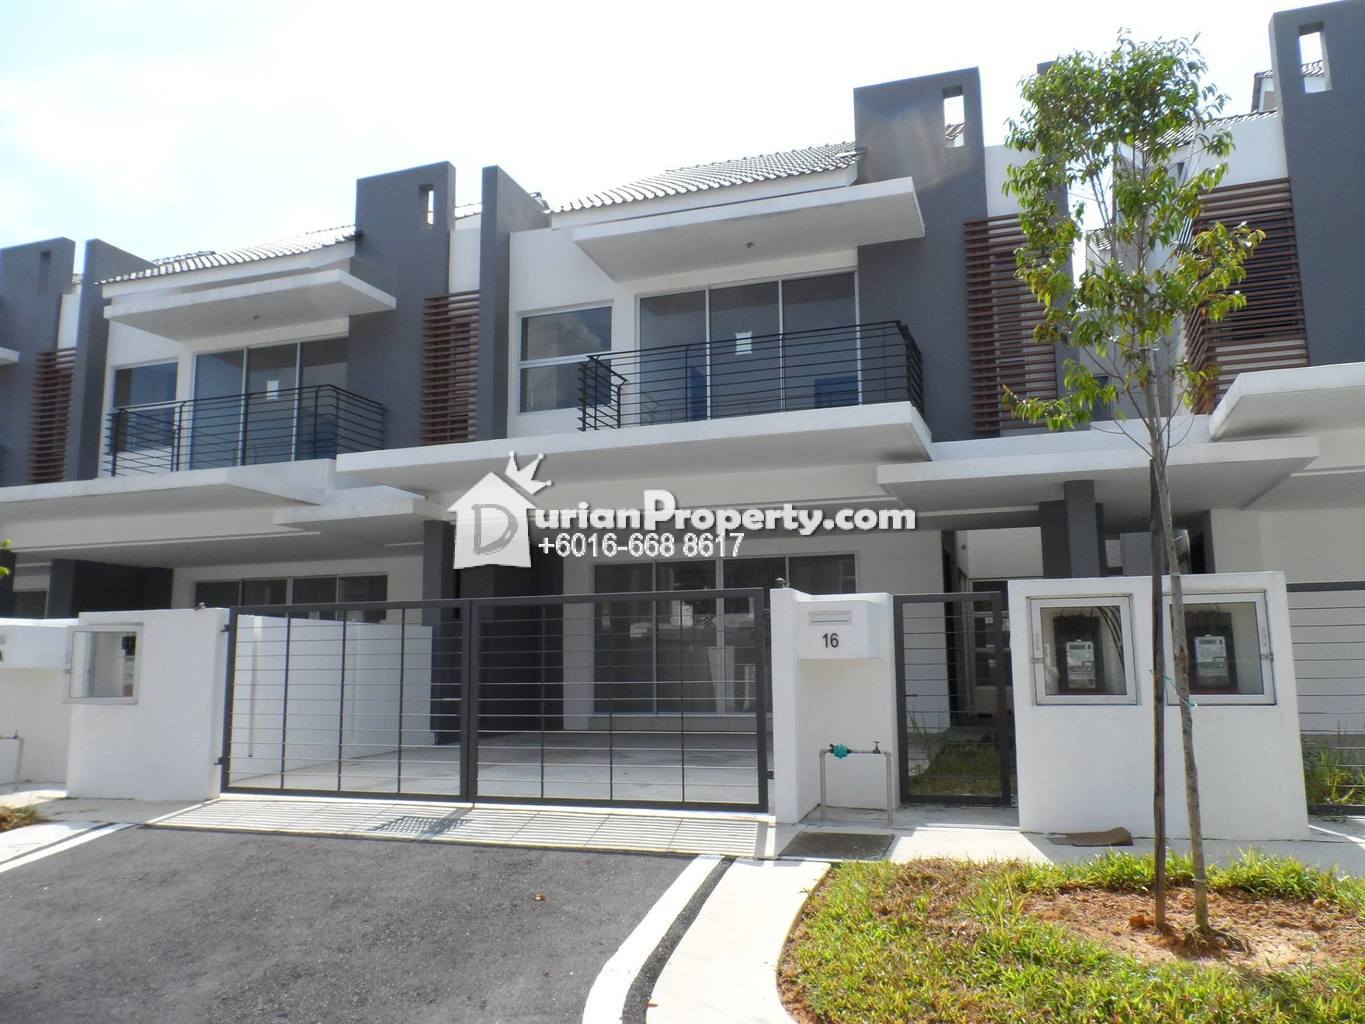 Terrace House For Sale At Emerald Gardens Rawang For Rm 800 000 By Daniel Yap Durianproperty